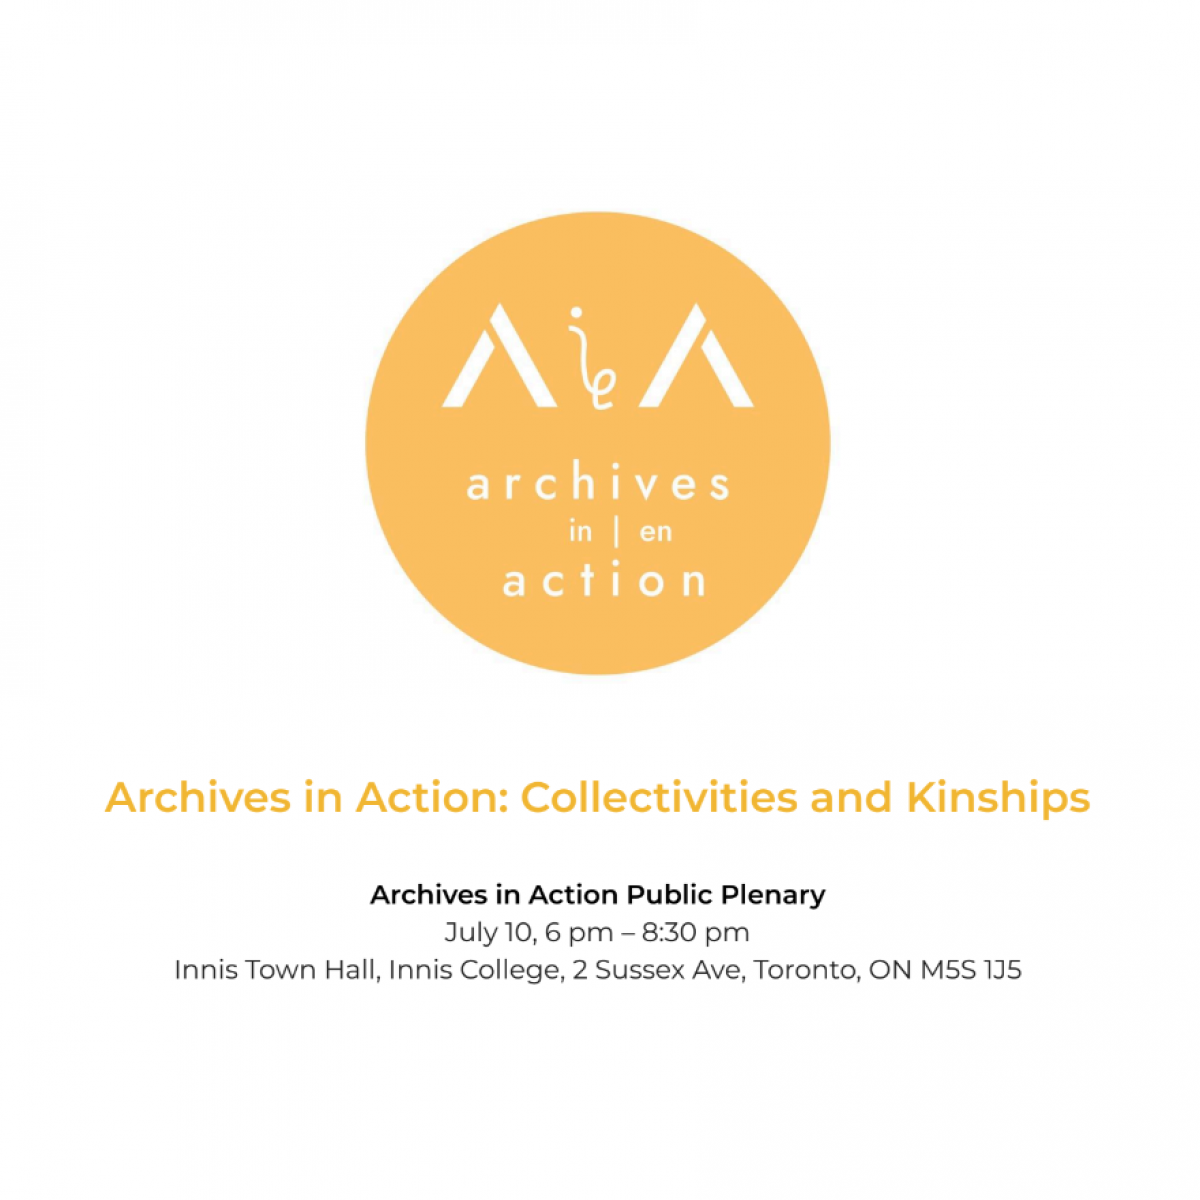 A circular logo on a white background that says "Archives in Action" in stylized sans-serif font.